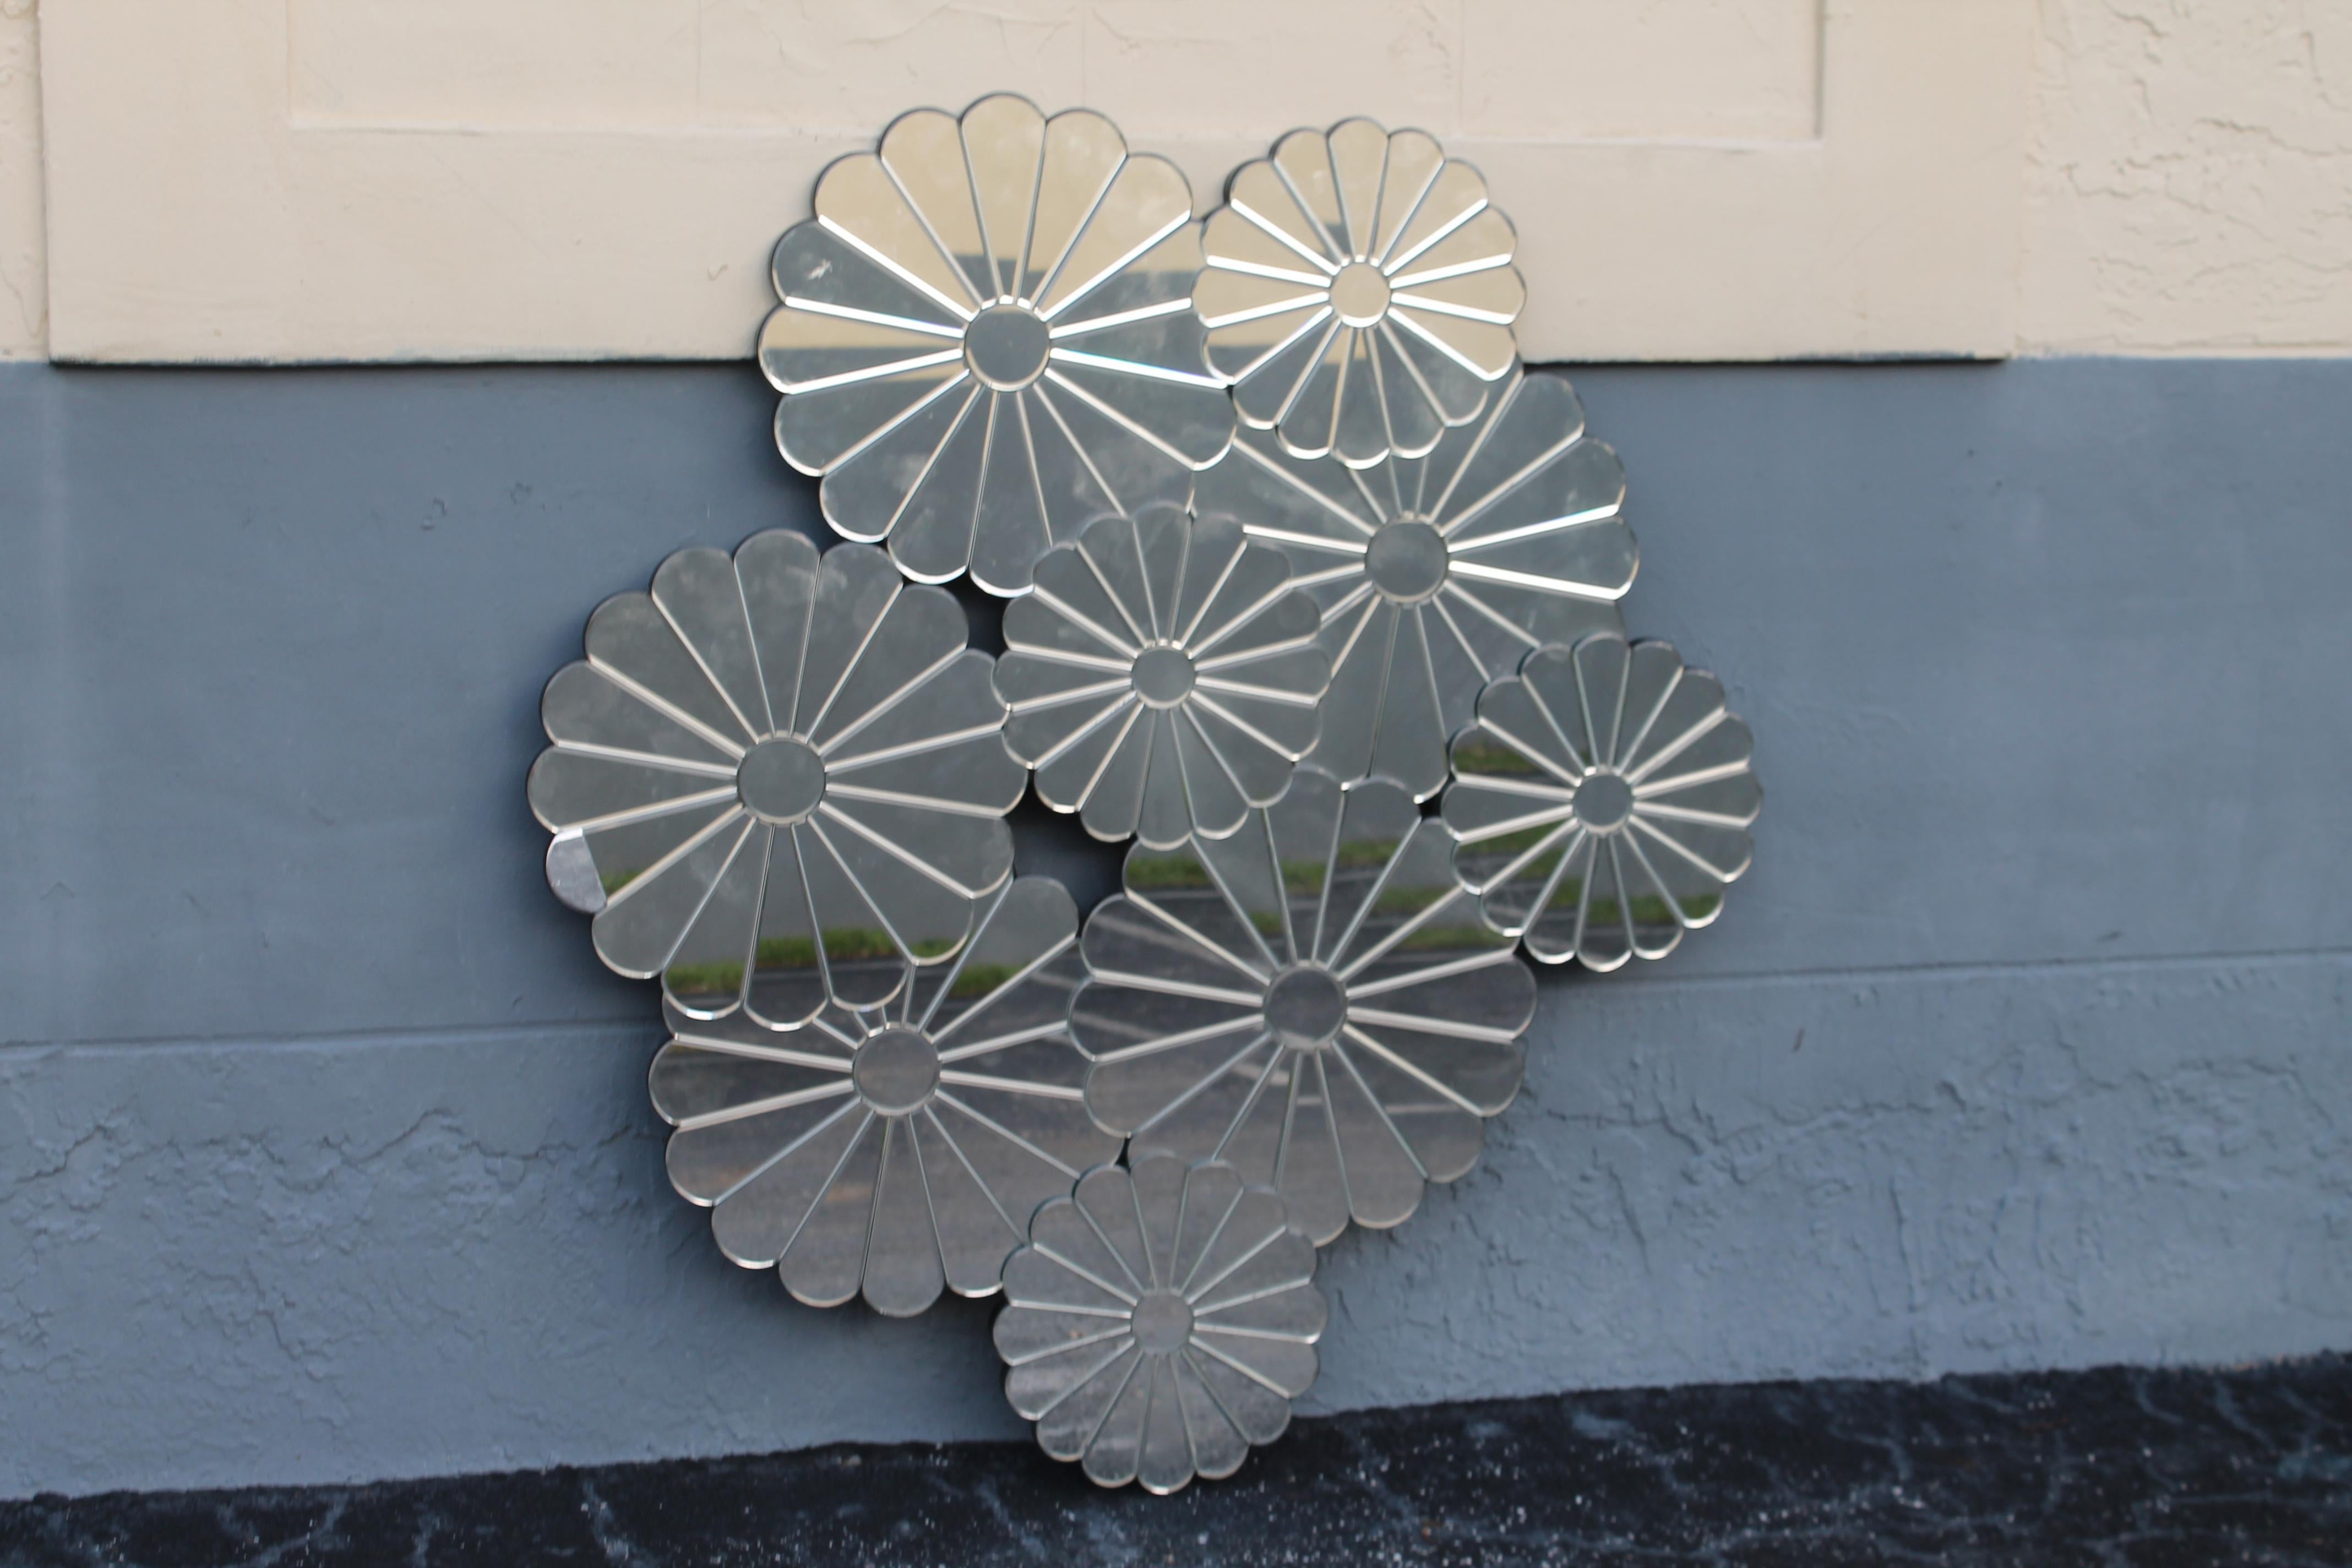 XL 1960's Mid Century Highly Detailed and Fully Mirrored Flowers Wall Mirror In Good Condition For Sale In Opa Locka, FL